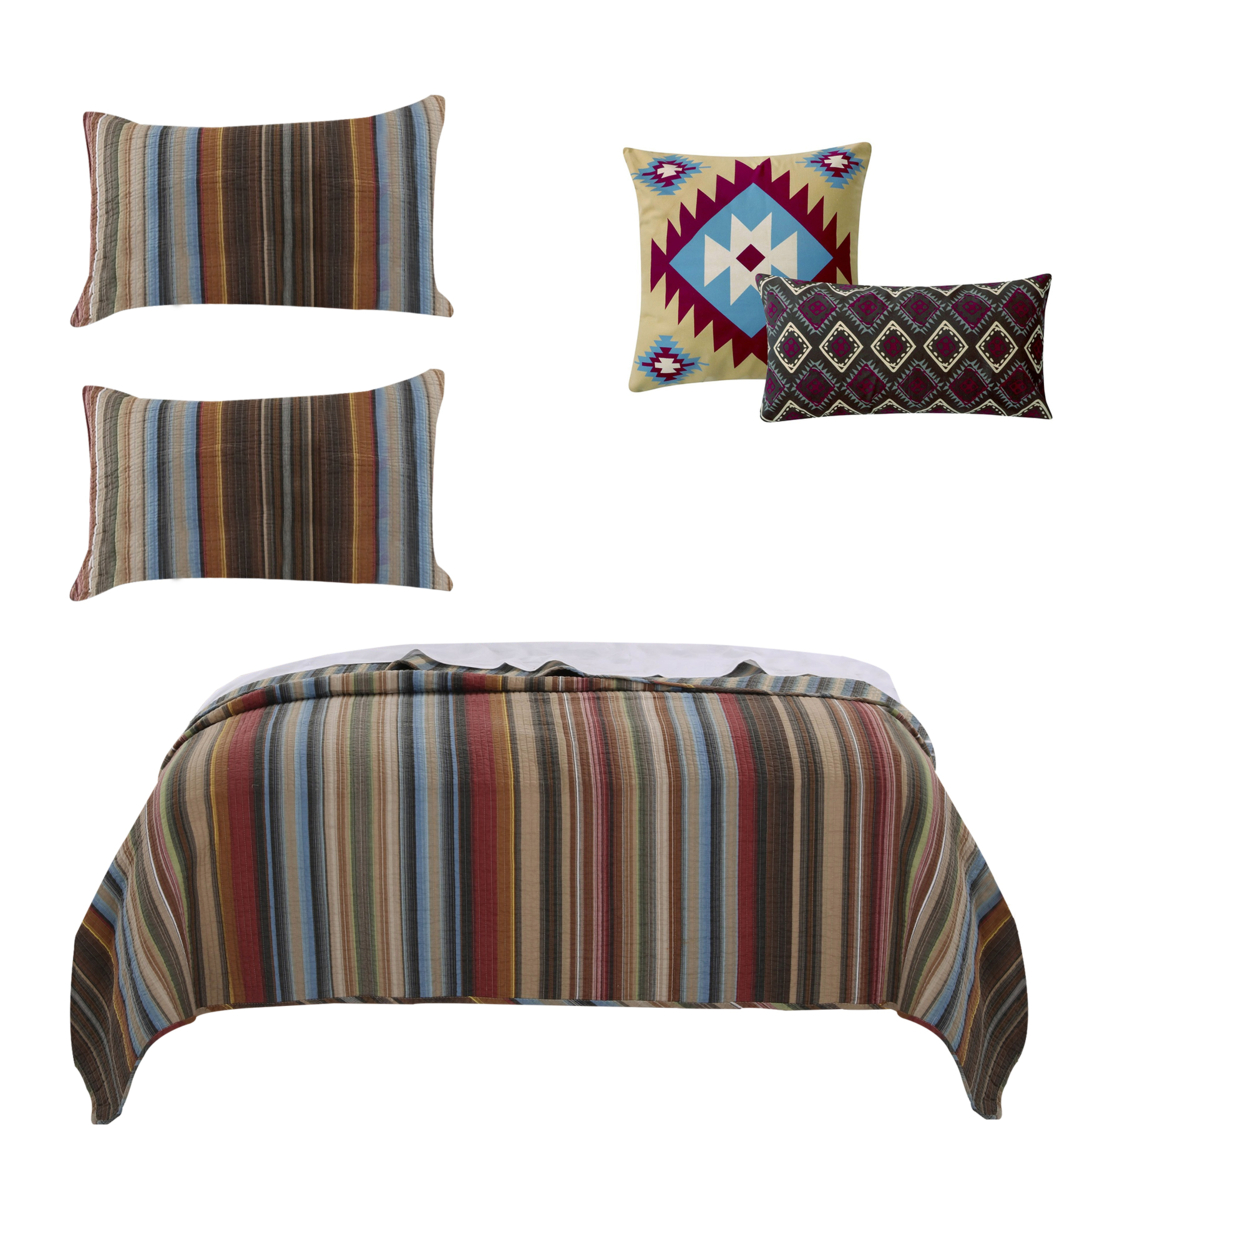 Stripe Pattern Cotton Quilt Set With 2 Pillows And 2 Quilt Shams,Multicolor- Saltoro Sherpi